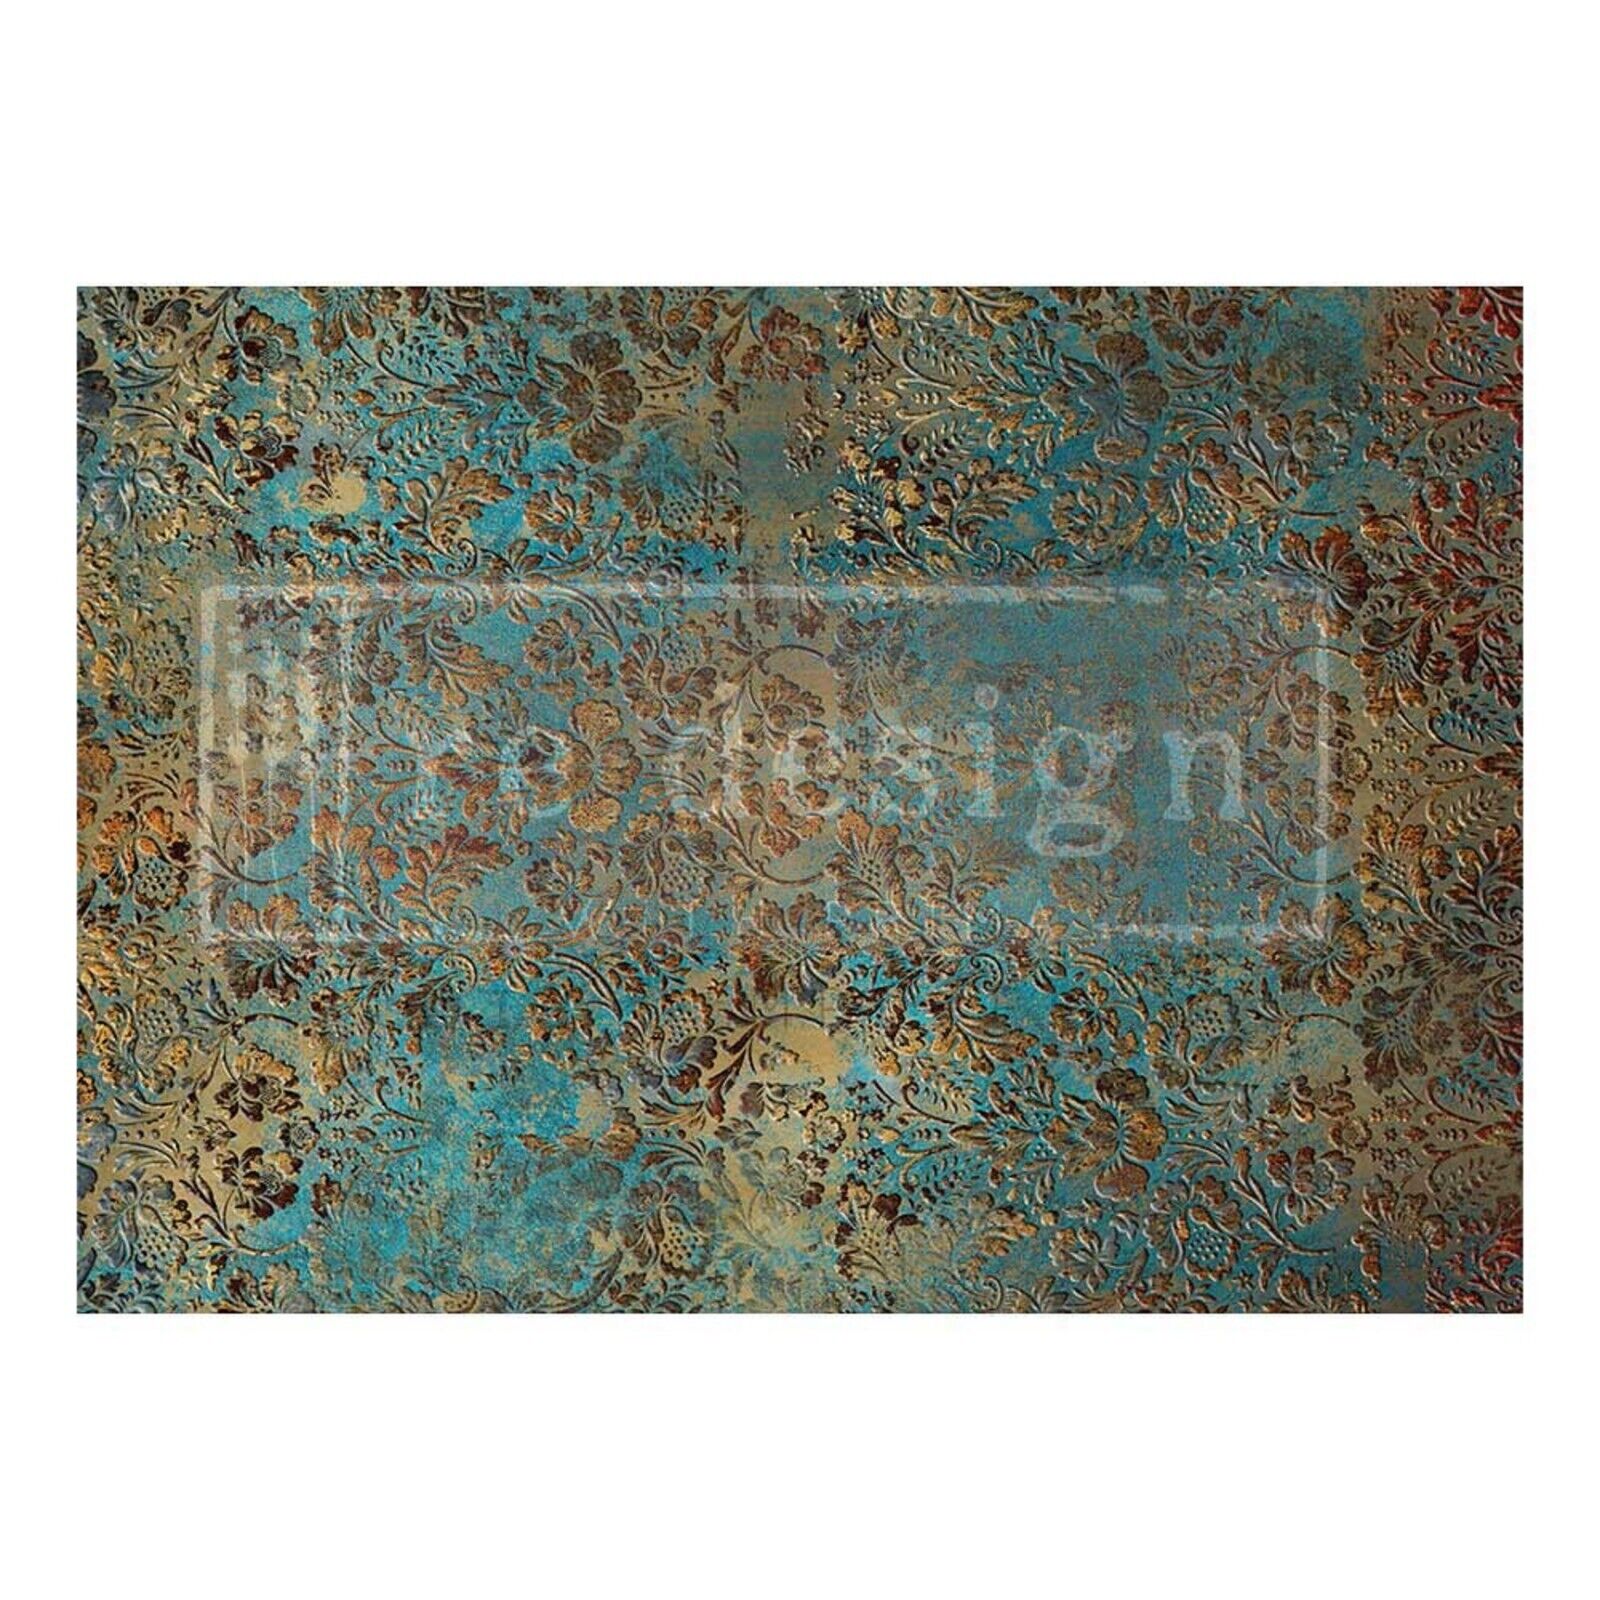 Redesign With Prima Aged Patina A1 Fiber Paper For Decoupage, 23.4x33.1 In